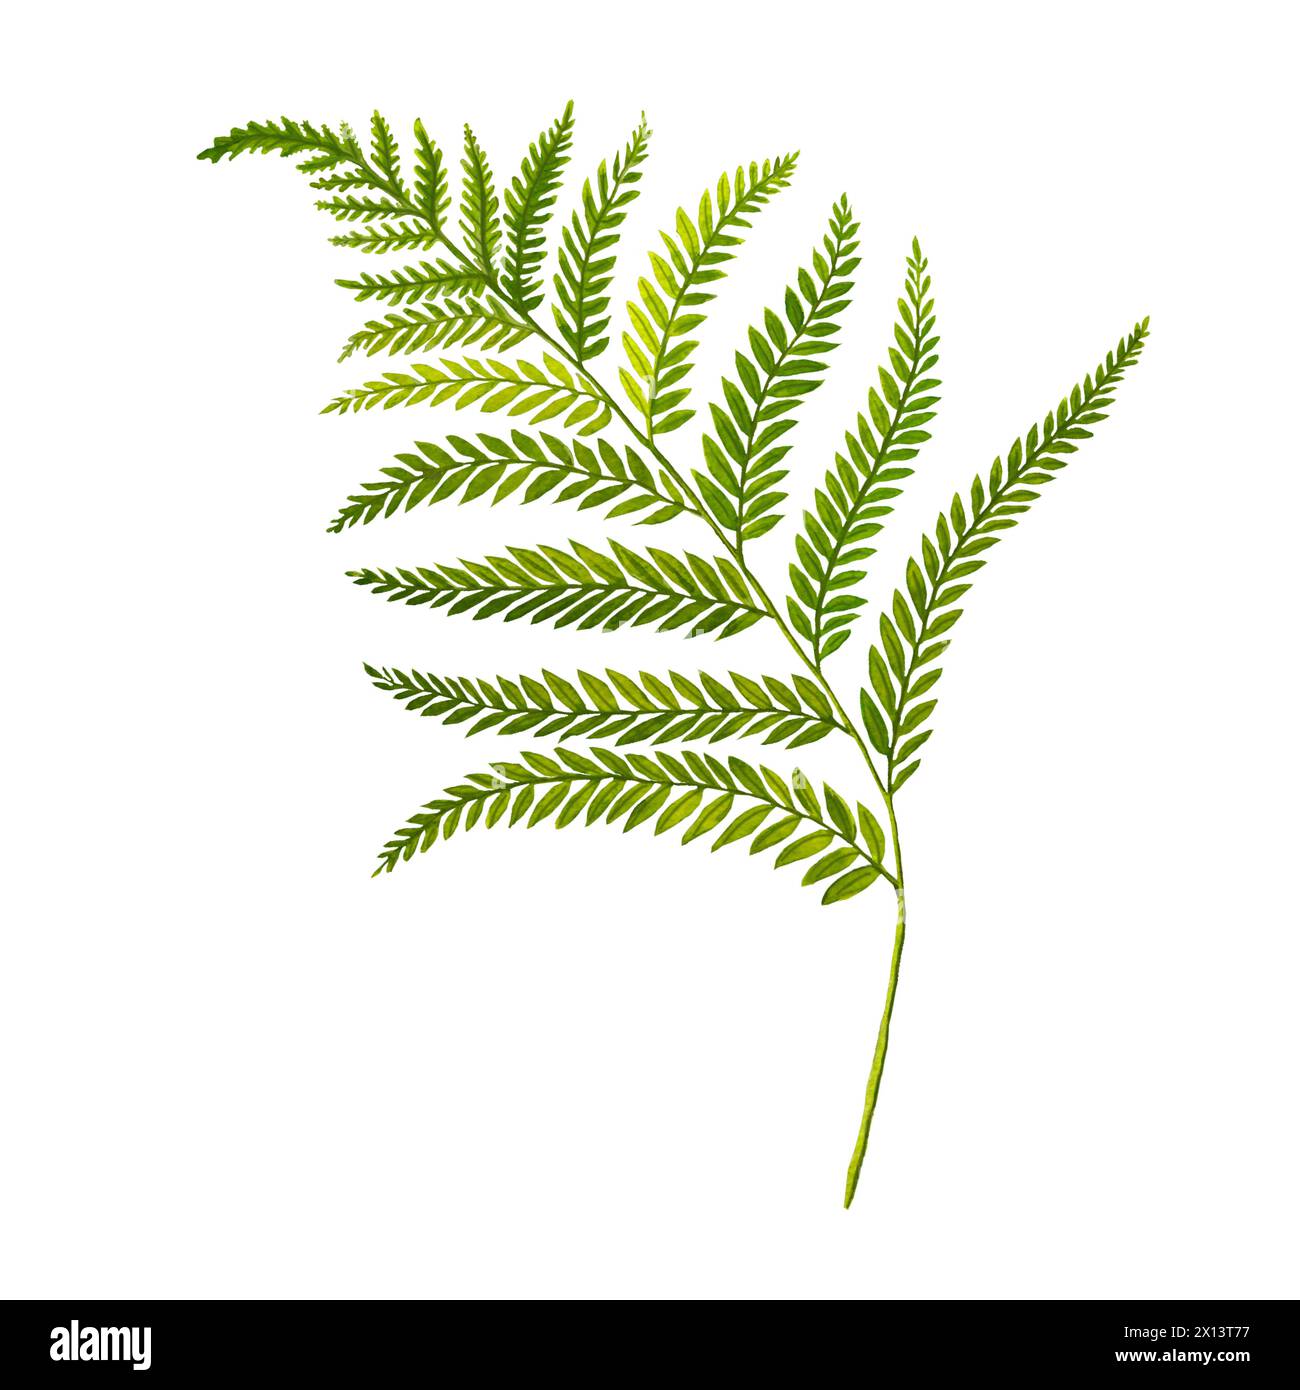 Watercolor fern leaves hand drawn illustration, isolated white background, flower clipart, for bouquets, wreaths, arrangements, wedding invitations Stock Photo